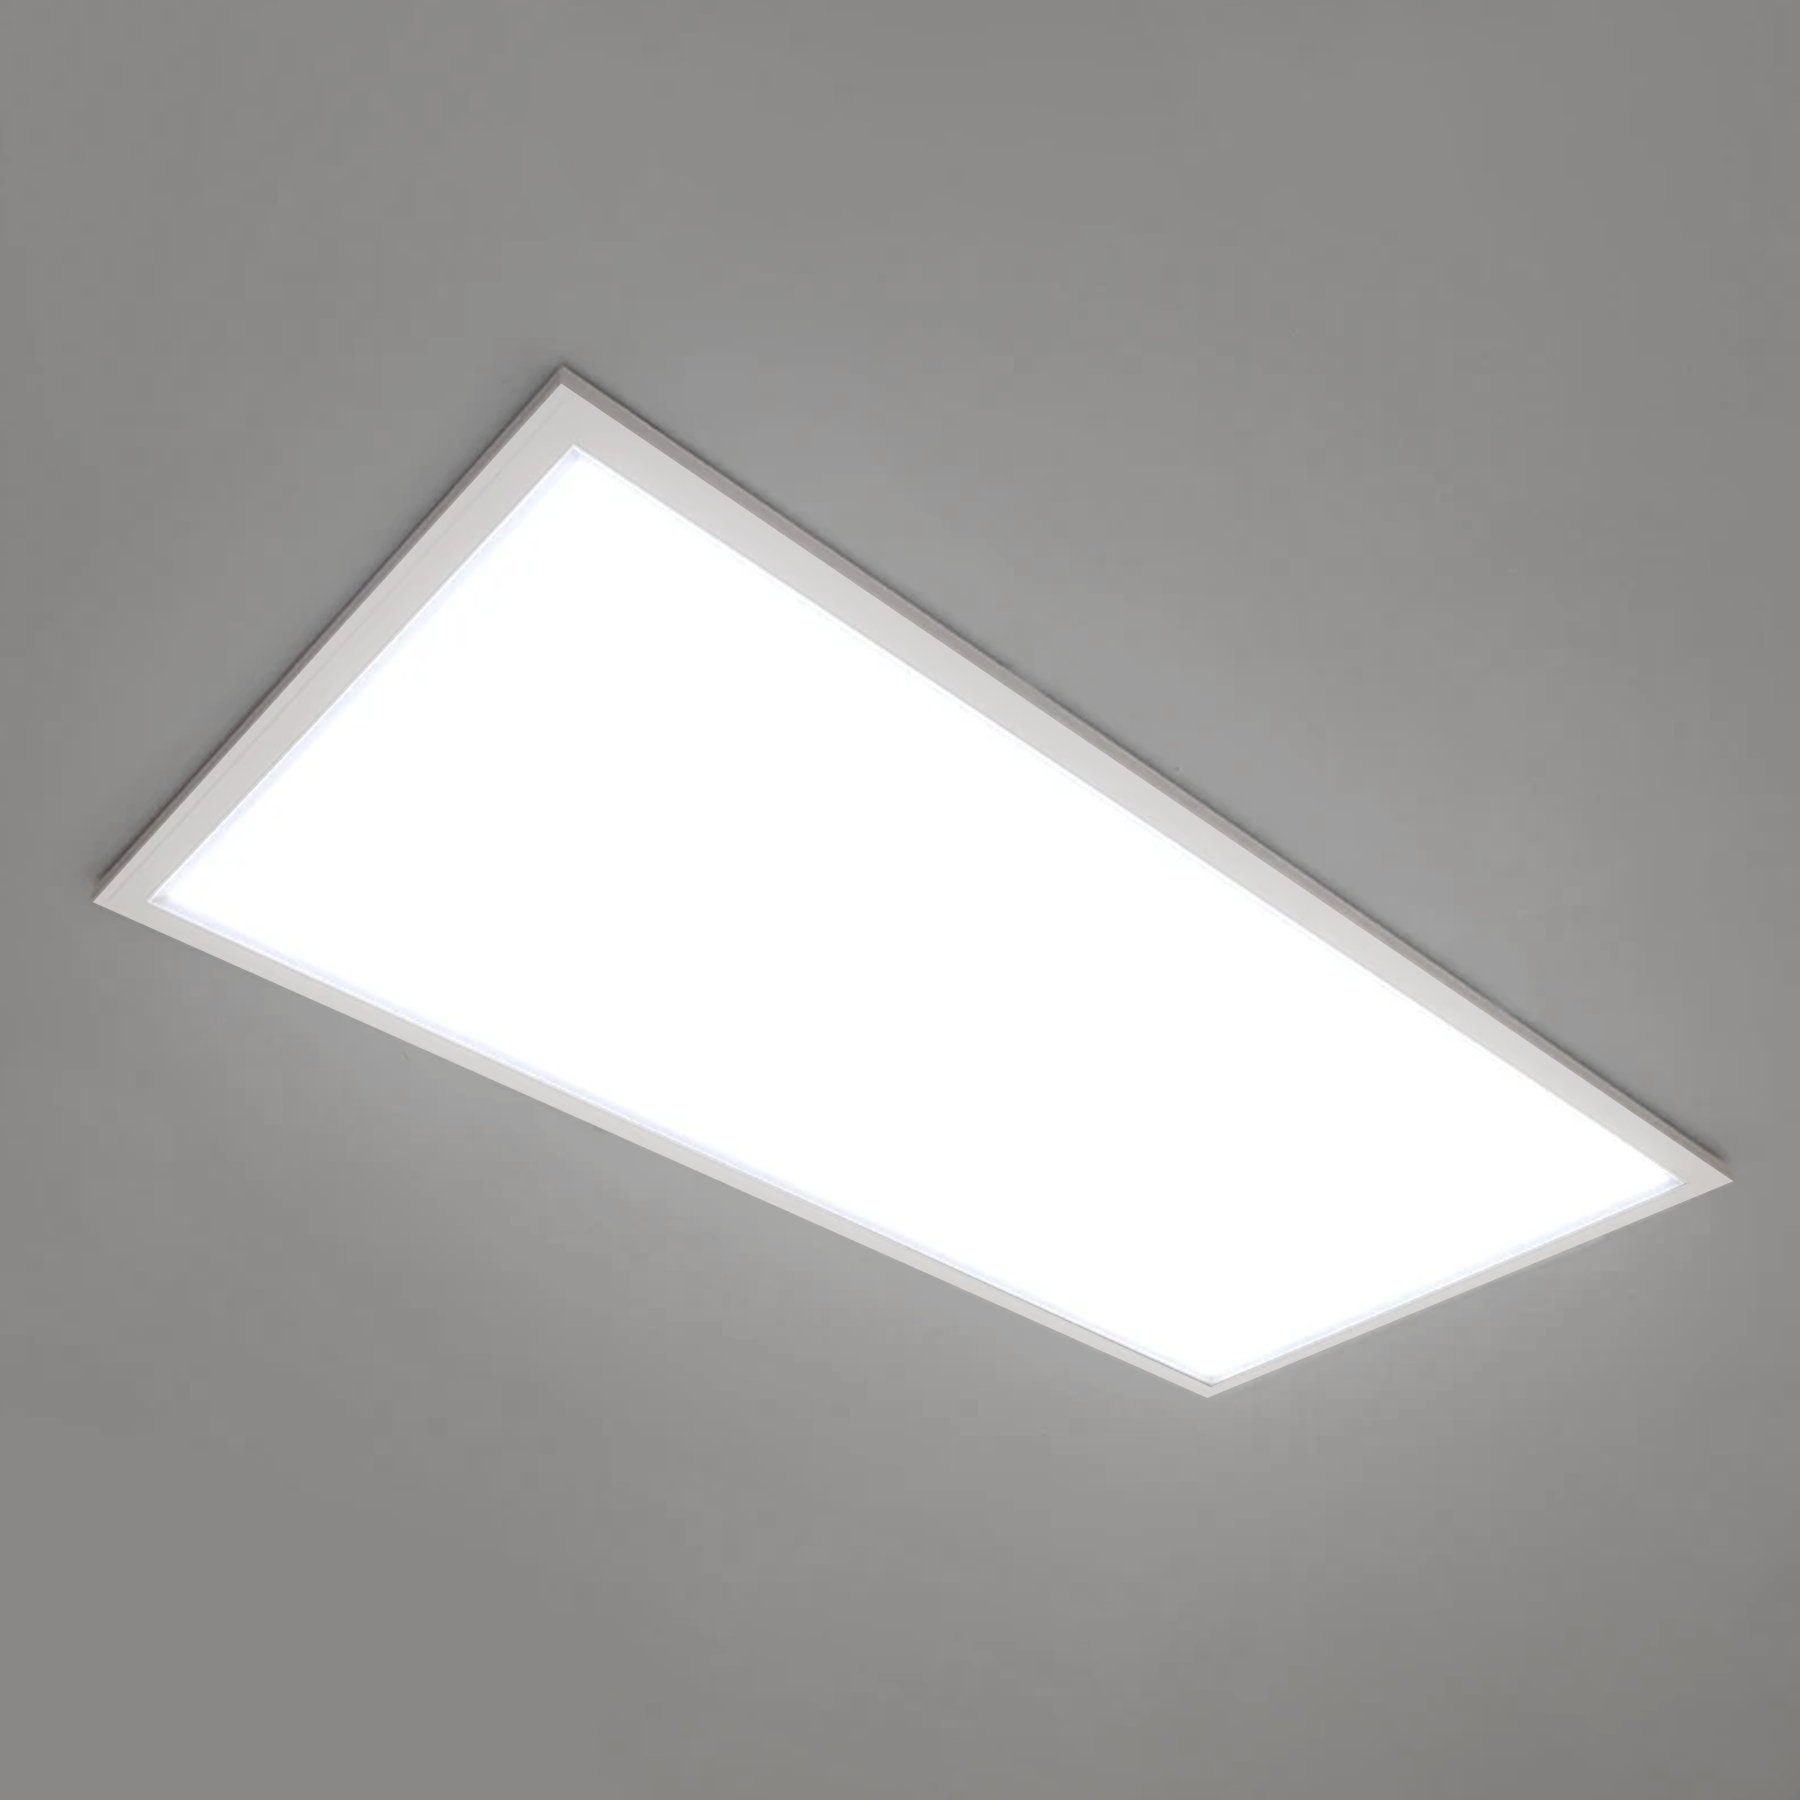 72W 2 ft. X 4 ft. LED Panel Light: 4000K Neutral White, 9000LM Dimmable - AC120V-277V, UL, DLC Listed, Damp Location, Flat Backlit Fixture for Recessed/Drop Ceiling Install